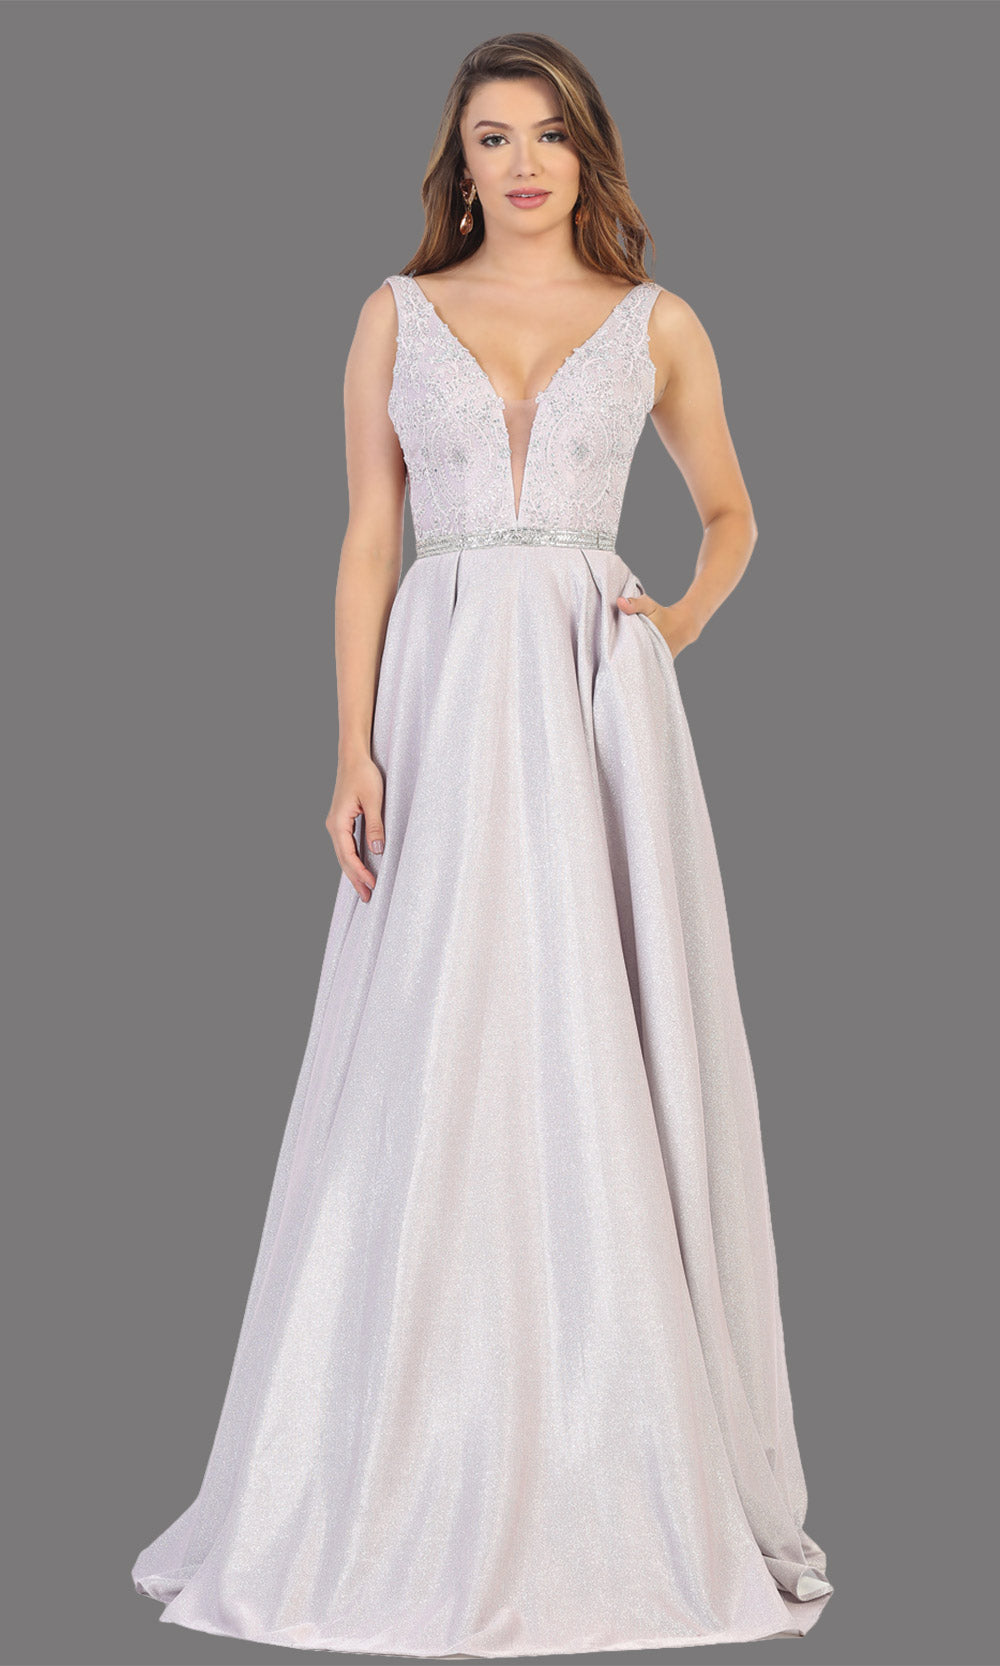 Mayqueen RQ7790 long mauve v neck flowy metallic glitter dress. Perfect lilac dress for prom, engagement dress, e-shoot dress, formal wedding guest dress, debut, quinceanera, sweet 16, gala. Plus sizes avail in this light blue semi ballgown.jpg